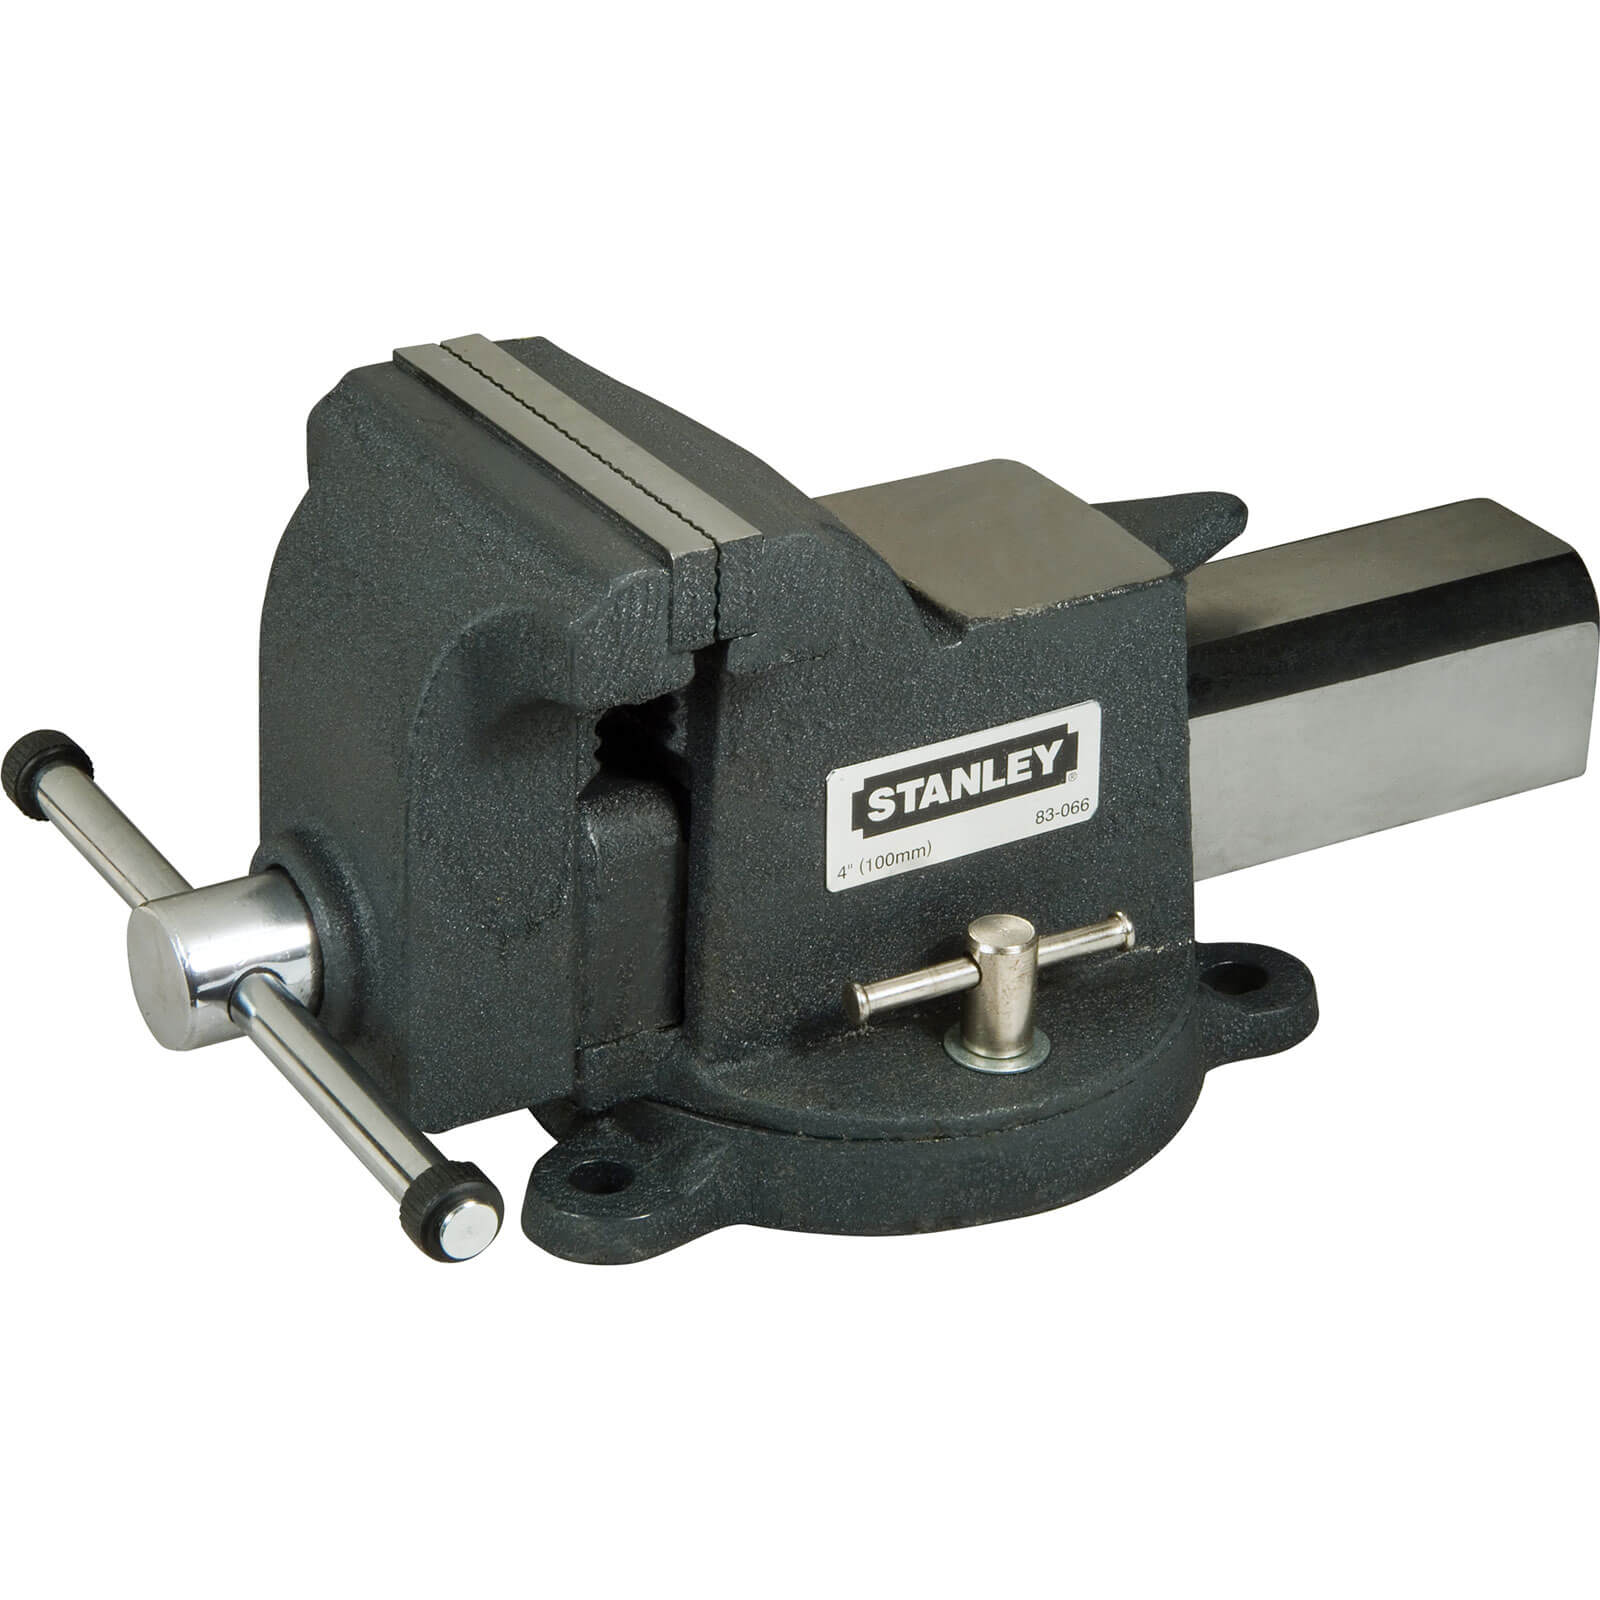 Image of Stanley Heavy Duty Bench Vice 150mm